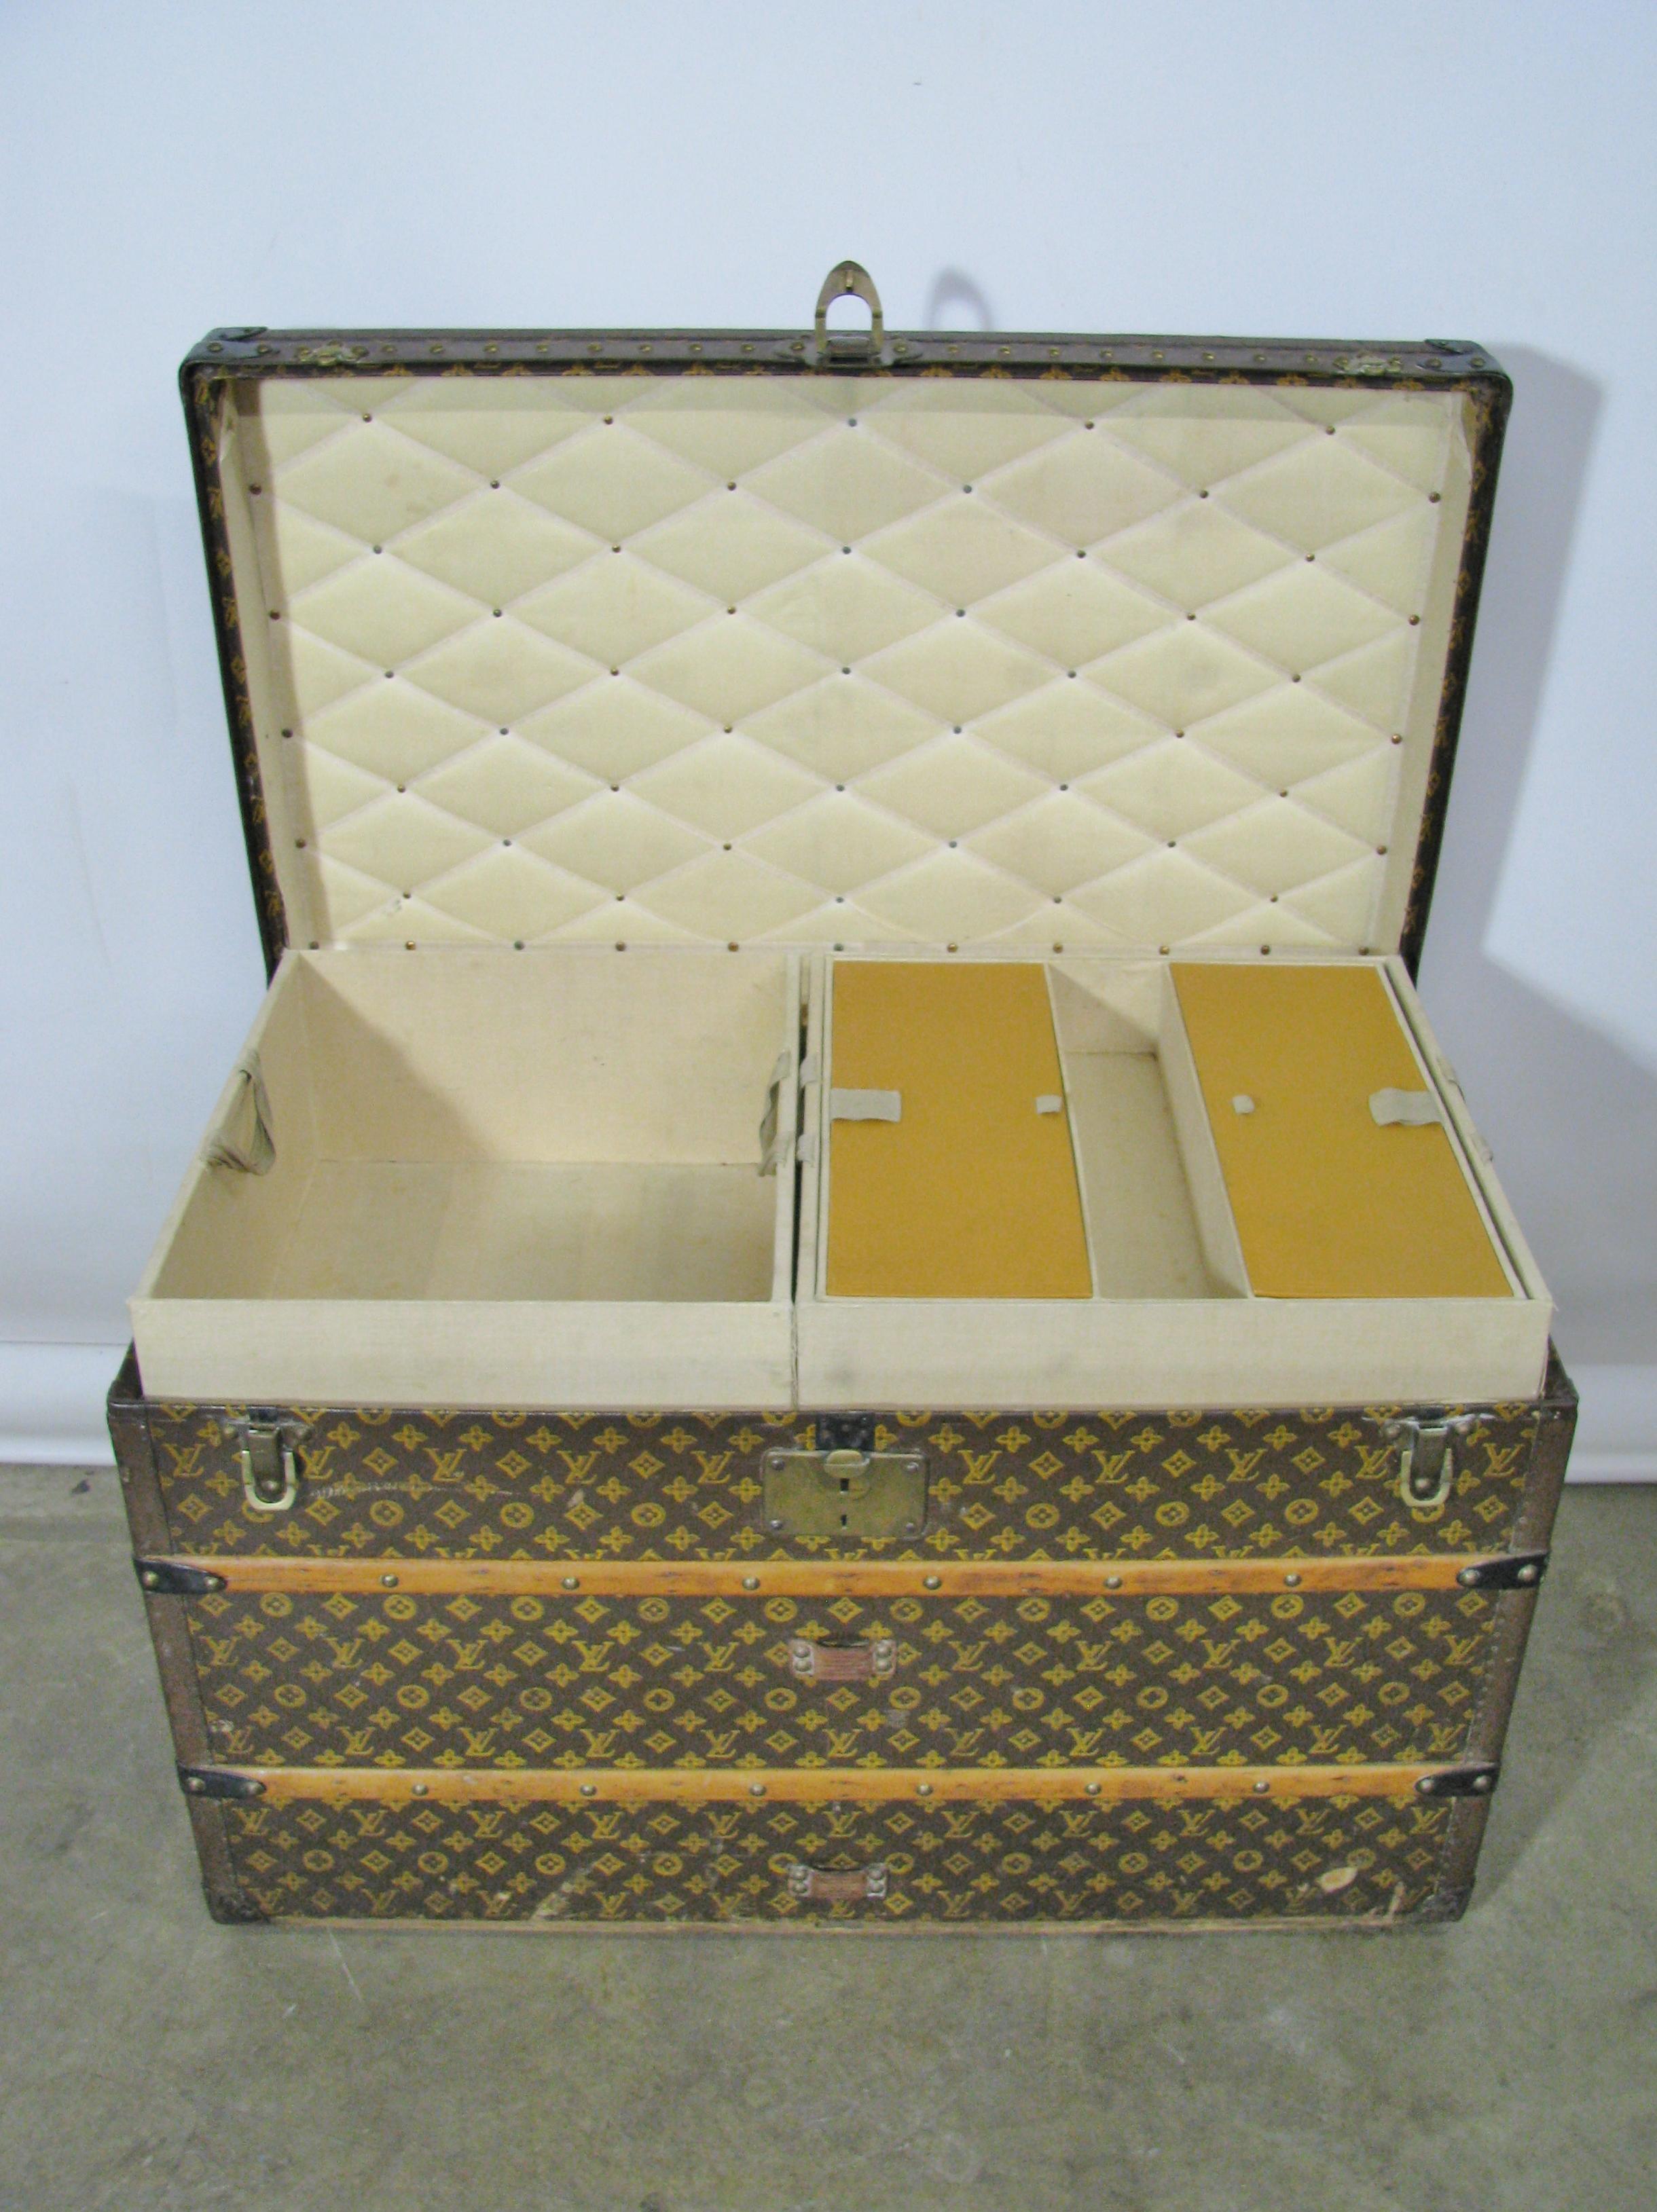 Vintage Late 1920s Louis Vuitton Steamer Trunk with Original Trays and Label For Sale 2